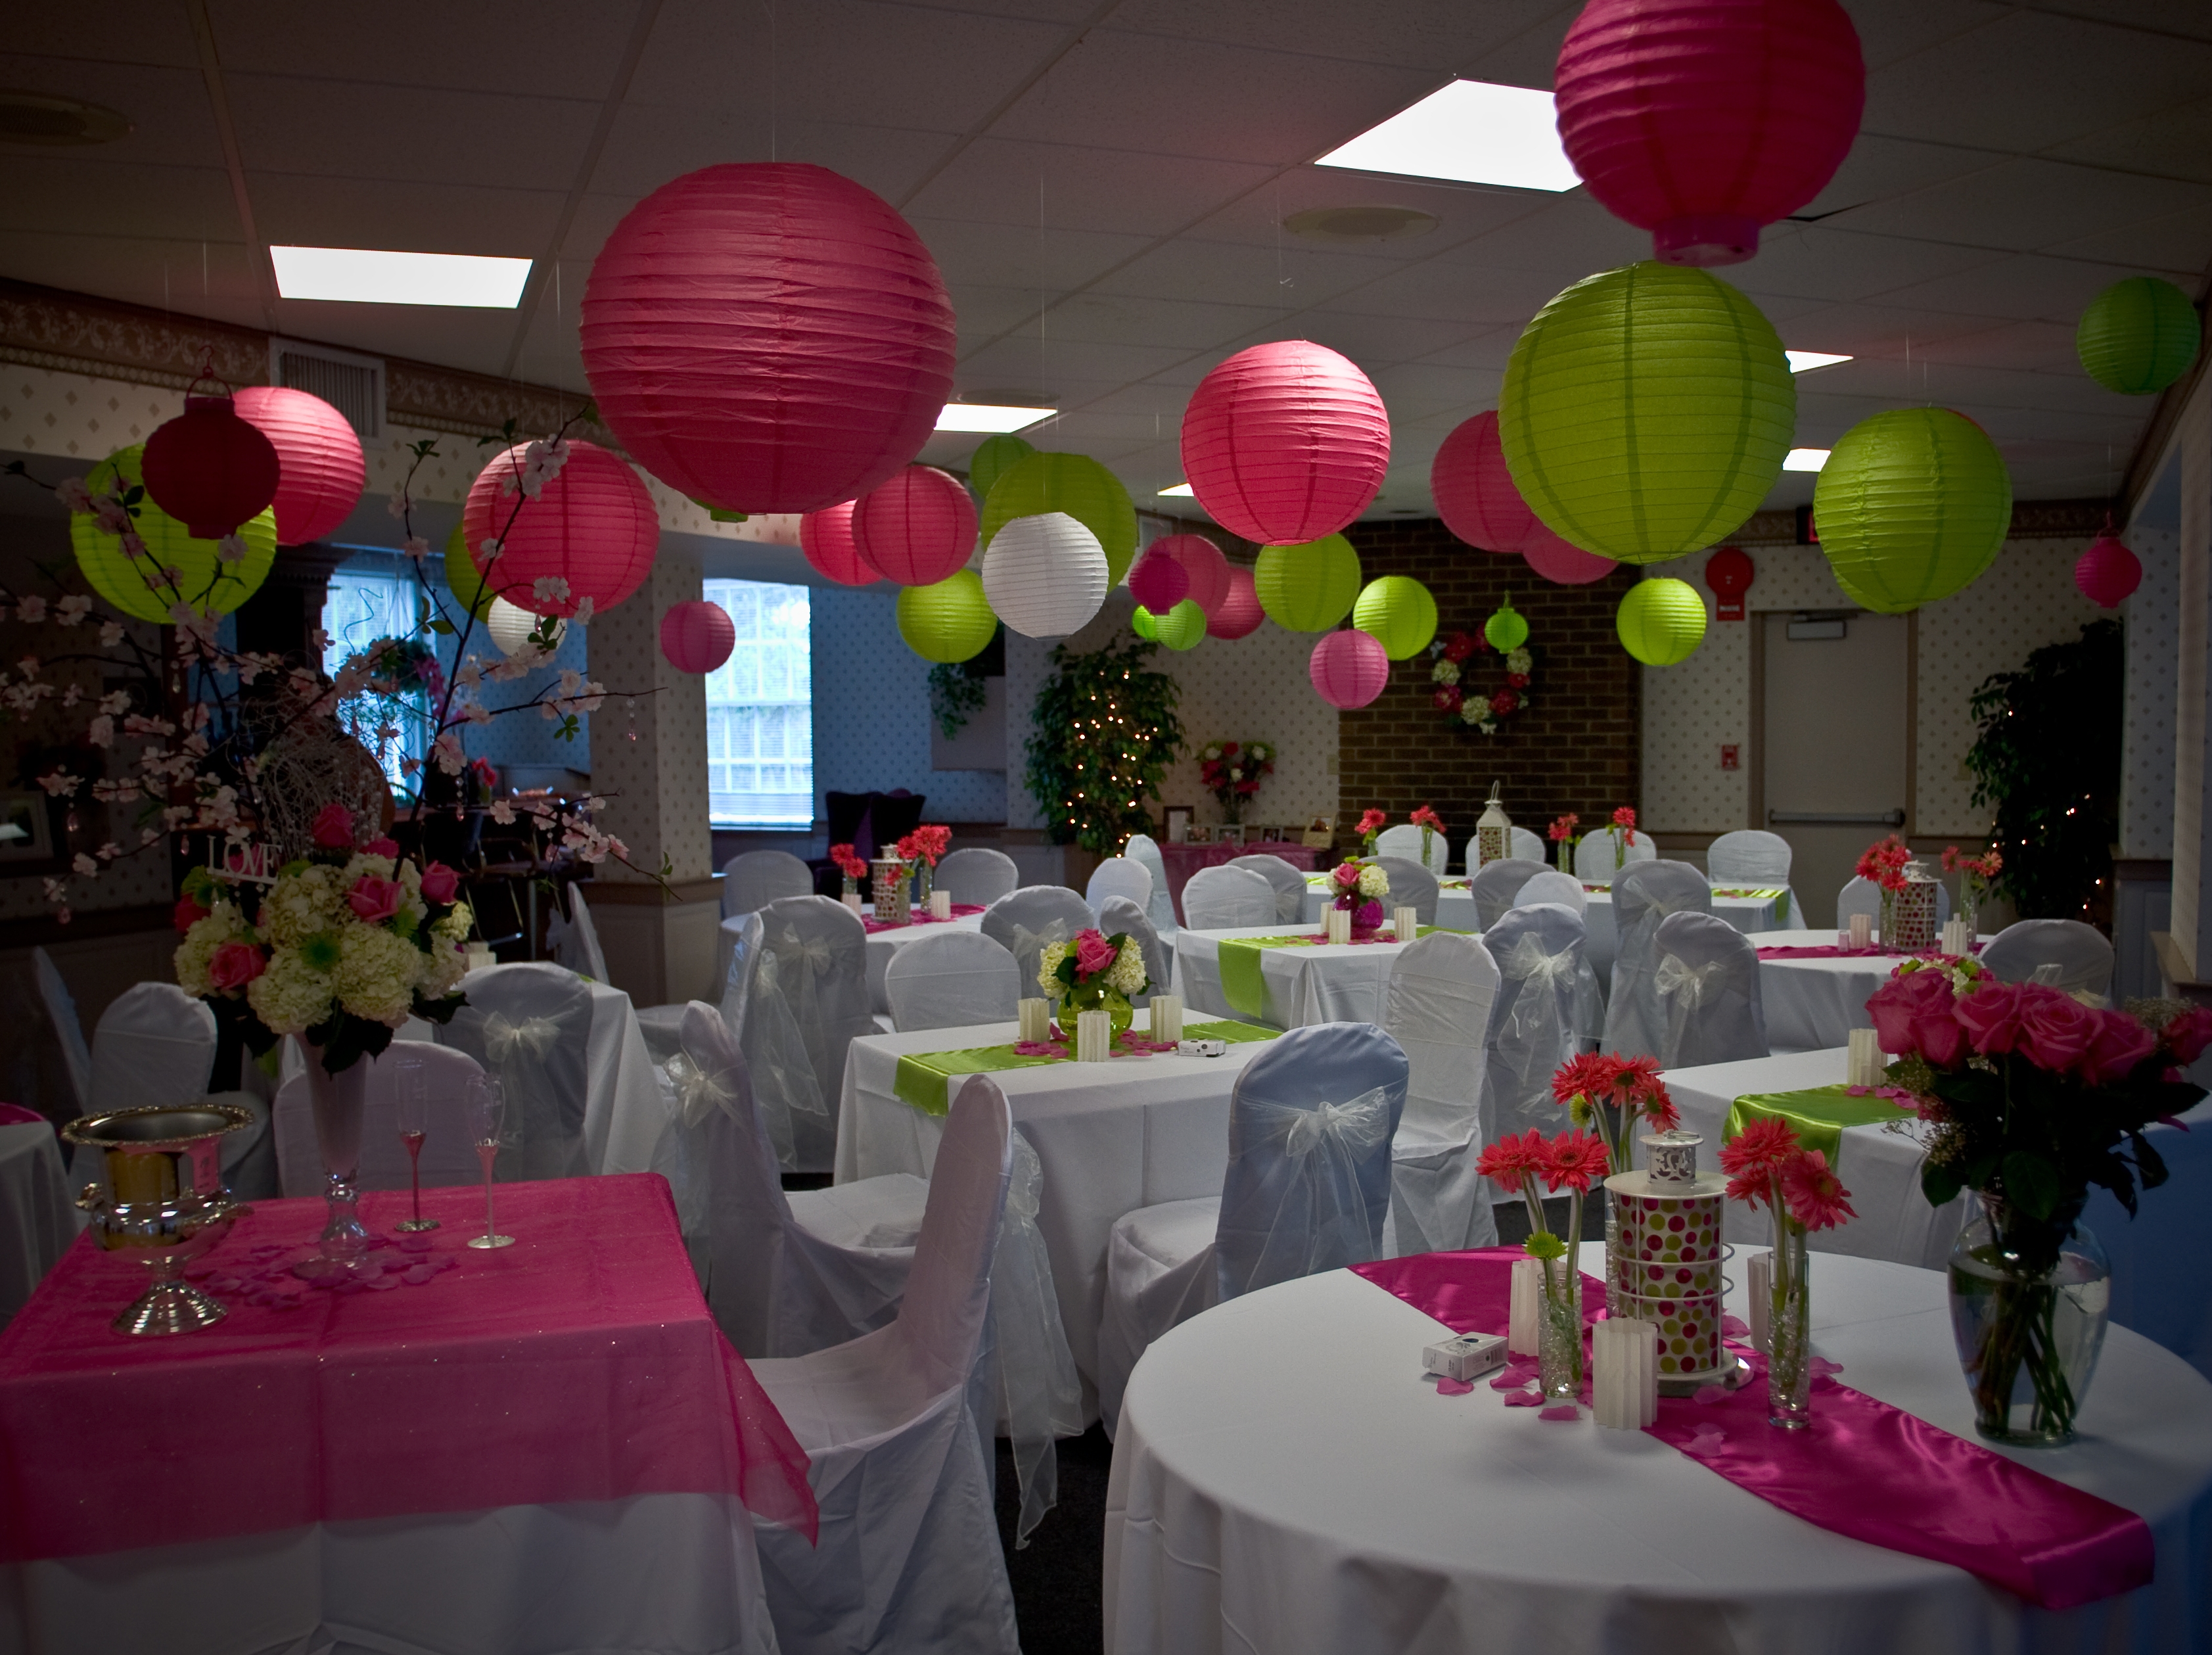 10 Awesome Pink And Green Wedding Ideas pink and lime green wedding wedding ideas uxjj 2022